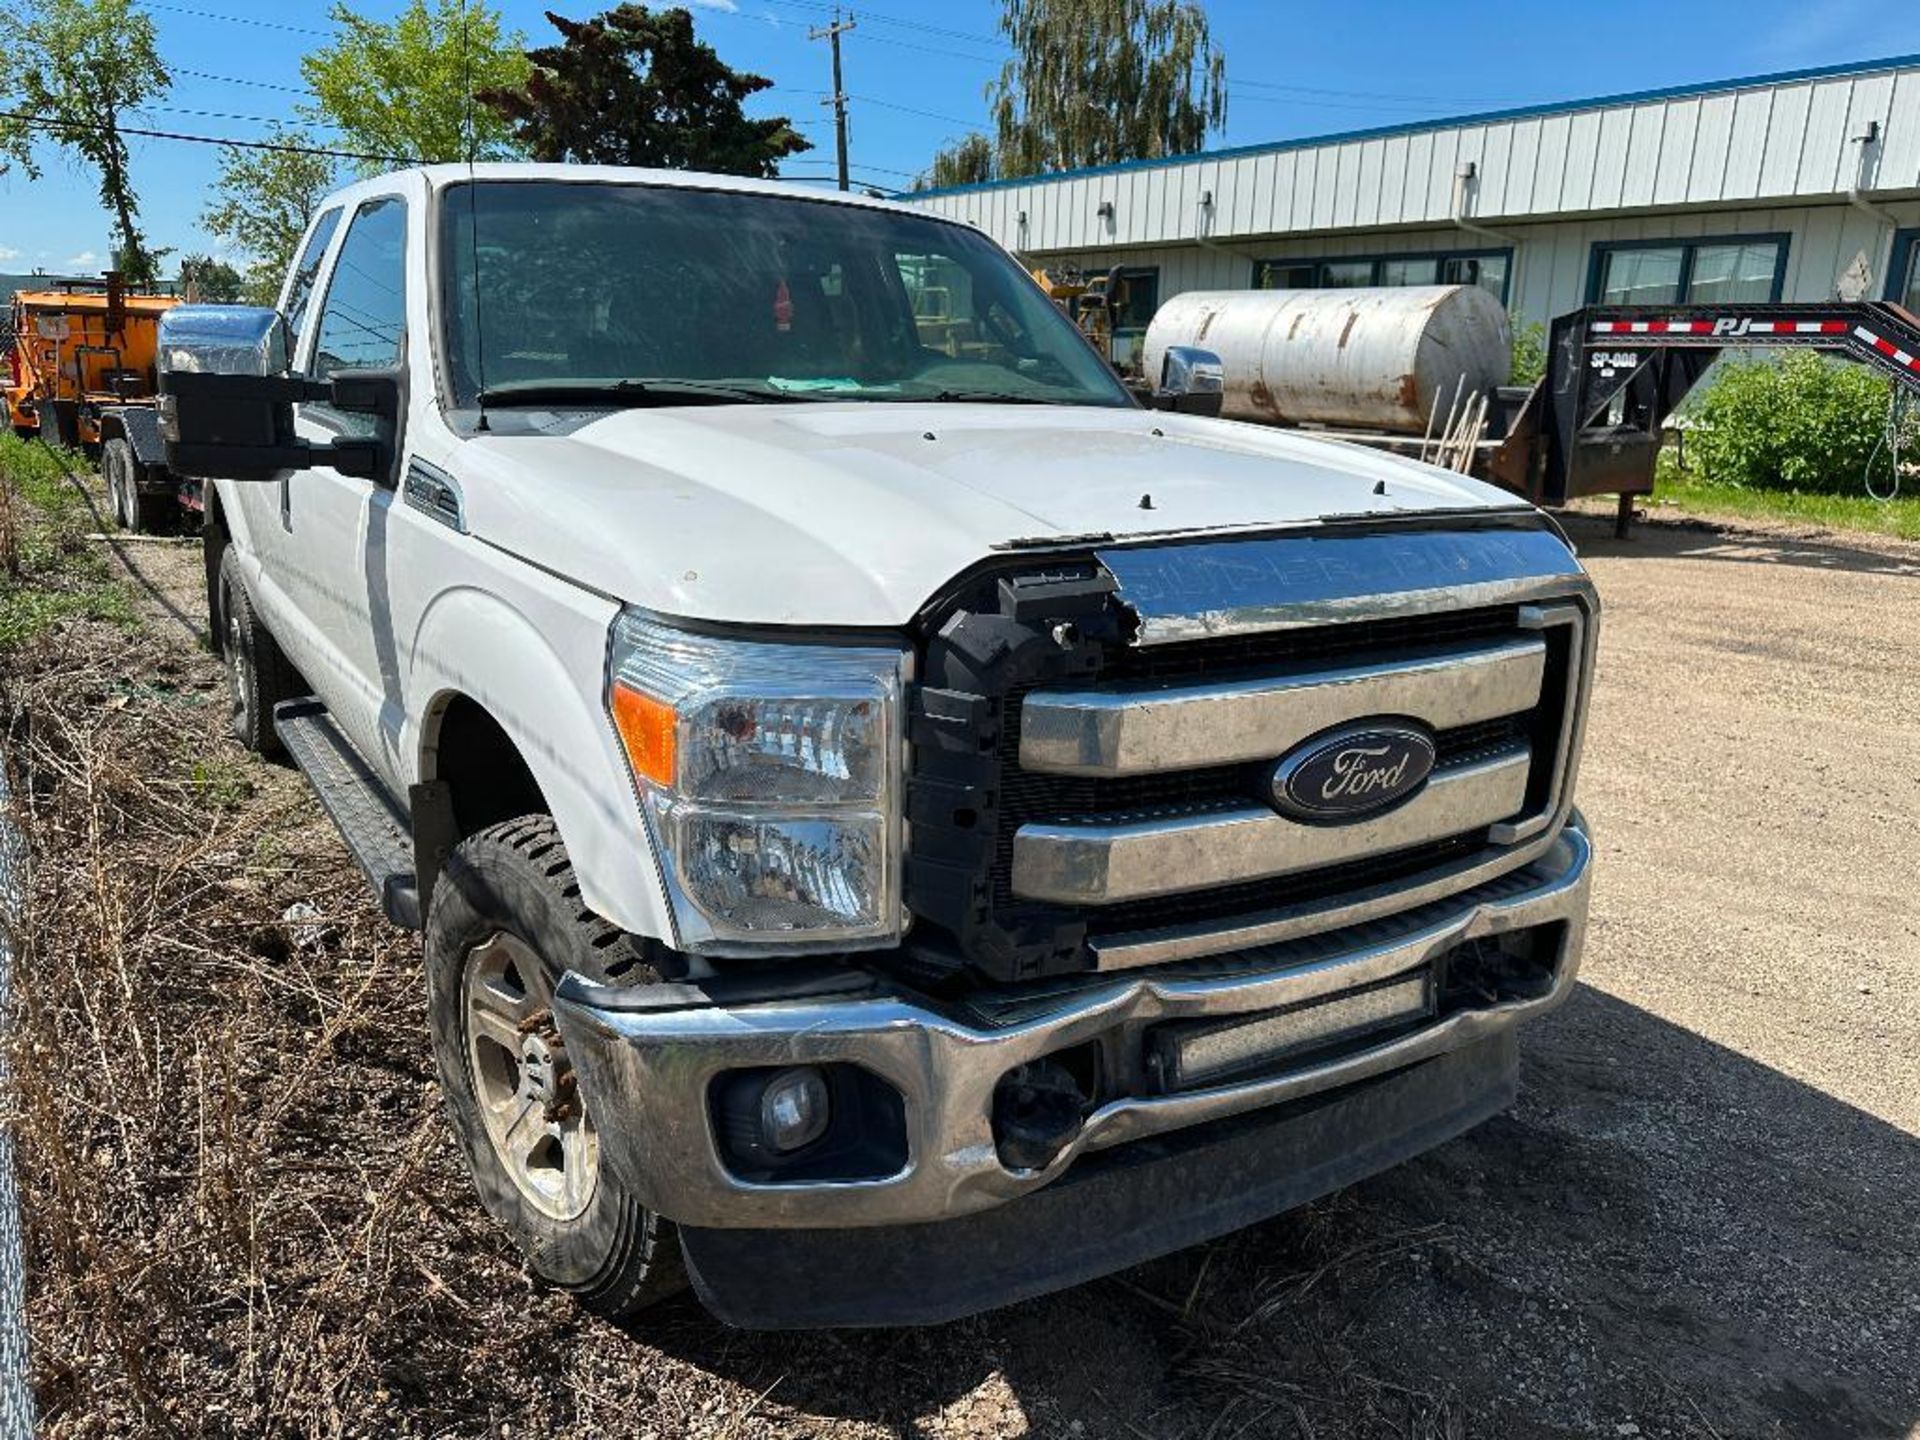 2015 Ford F-250 XLT Ext. Cab Pickup Truck, 238,245 kms Showing, VIN: 1FT7X2B67FEC06435